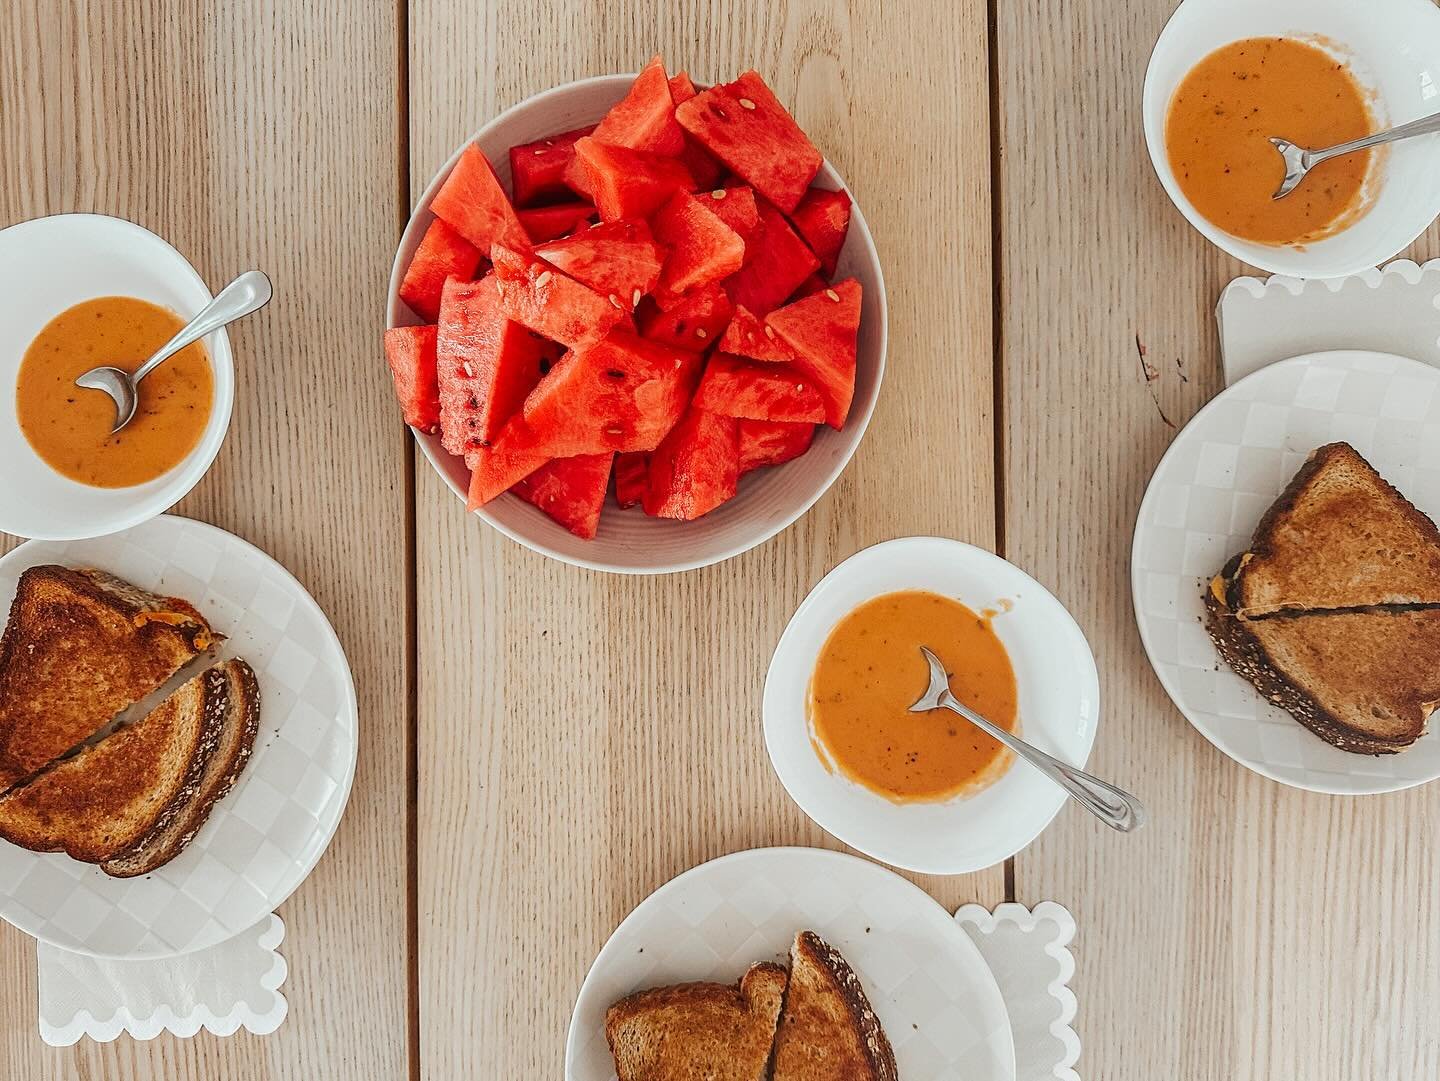 Summer eats.  Homemade roasted tomato soup with grilled cheese and watermelon 🤤